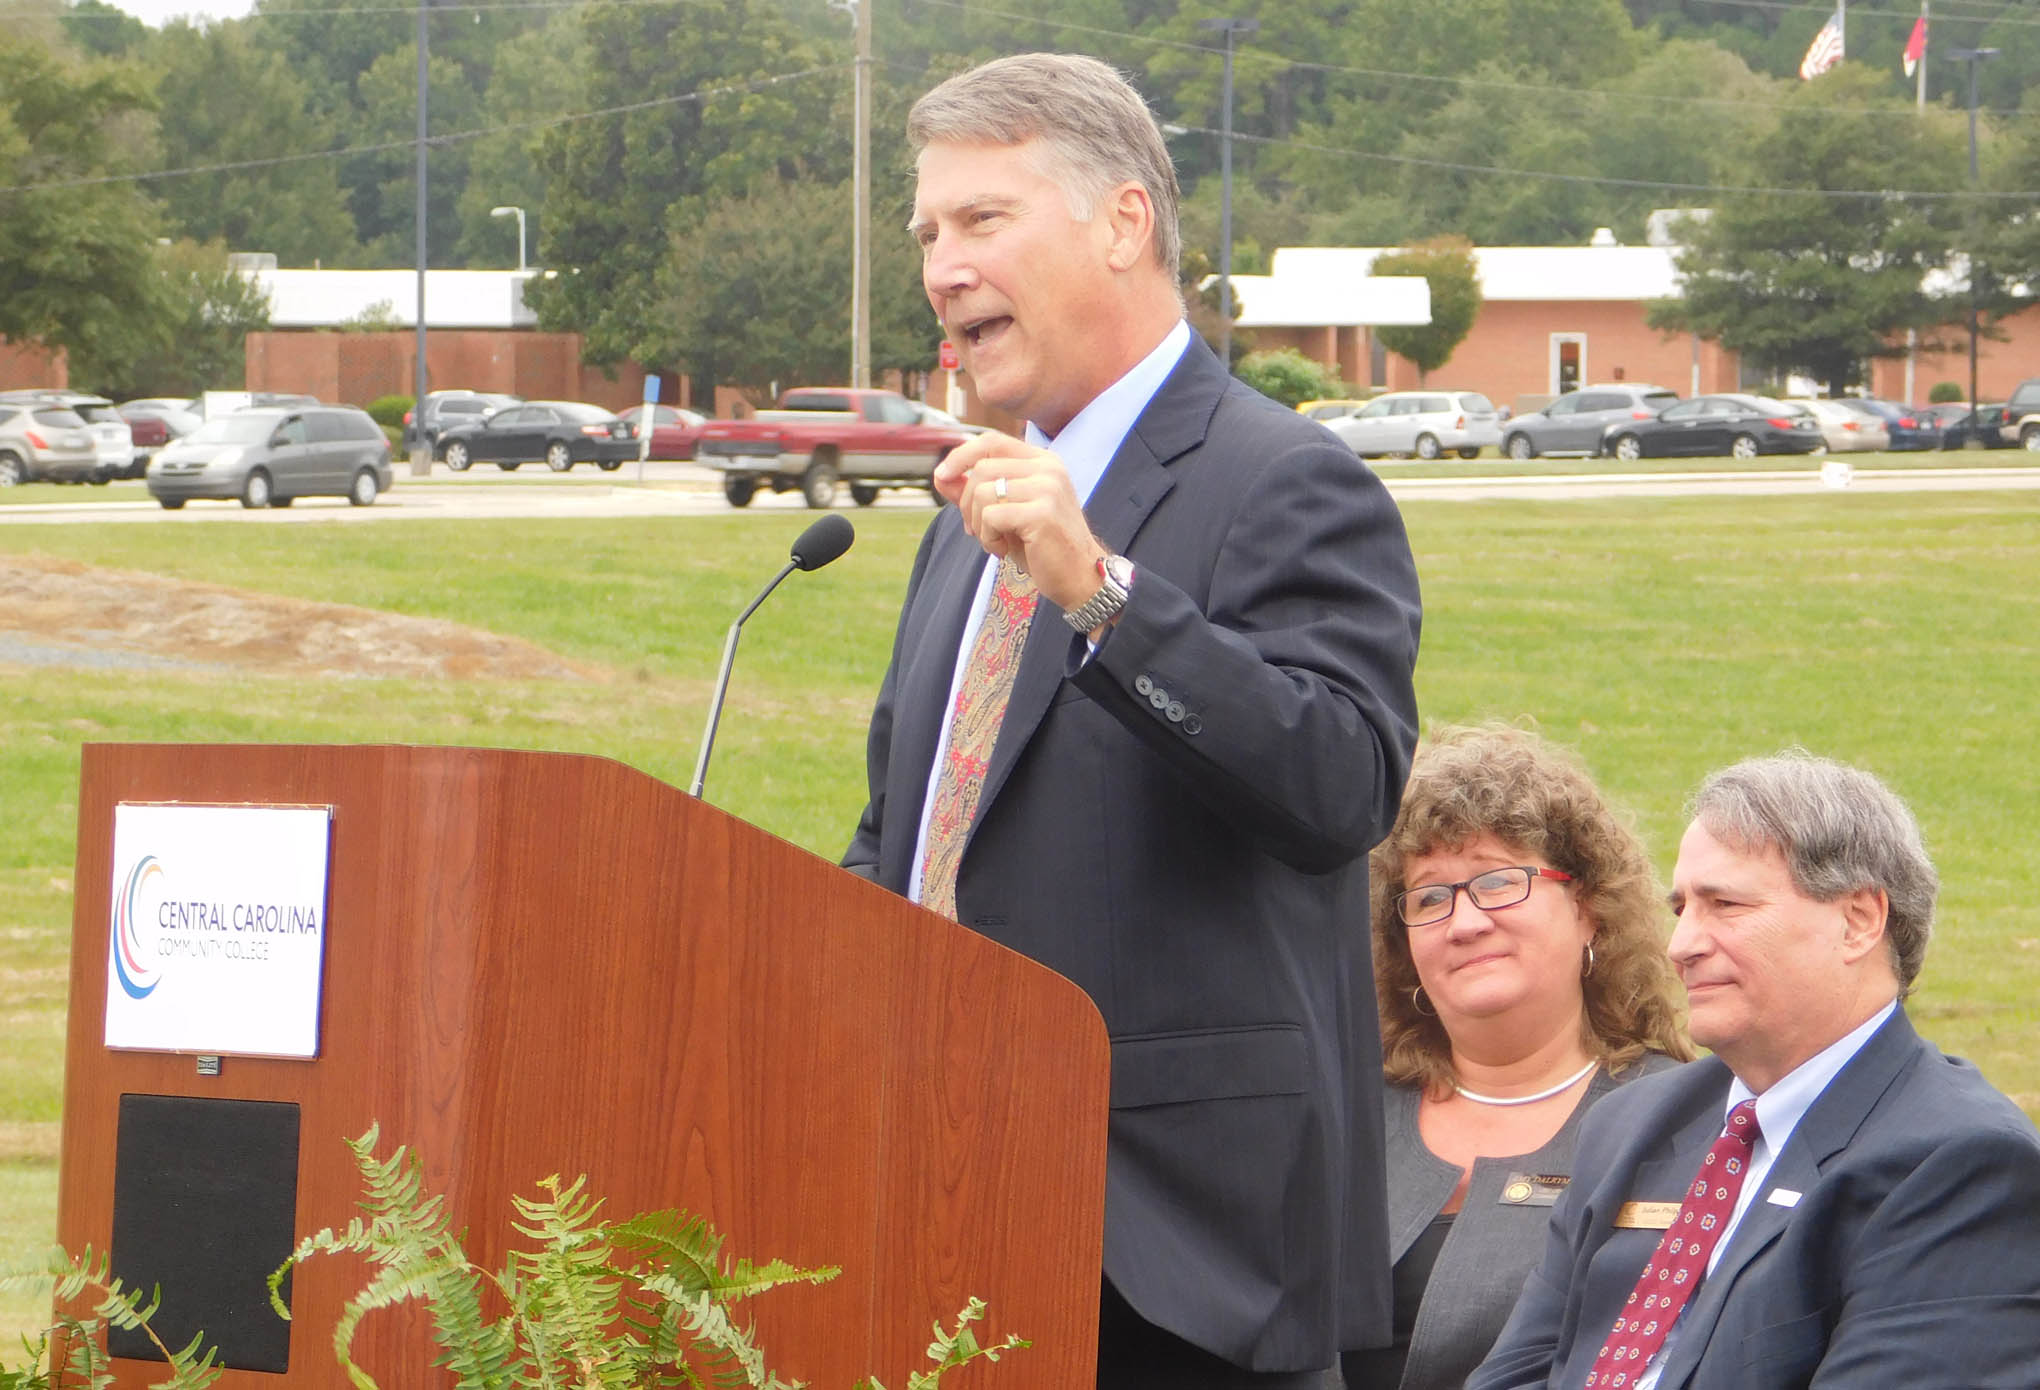 Click to enlarge,  Dennis Wicker, former North Carolina Lieutenant Governor and namesake of the Dennis A. Wicker Civic Center, called the Central Carolina Community College groundbreaking event a festive occasion. 'It's one of joy. One of excitement,' he said. 